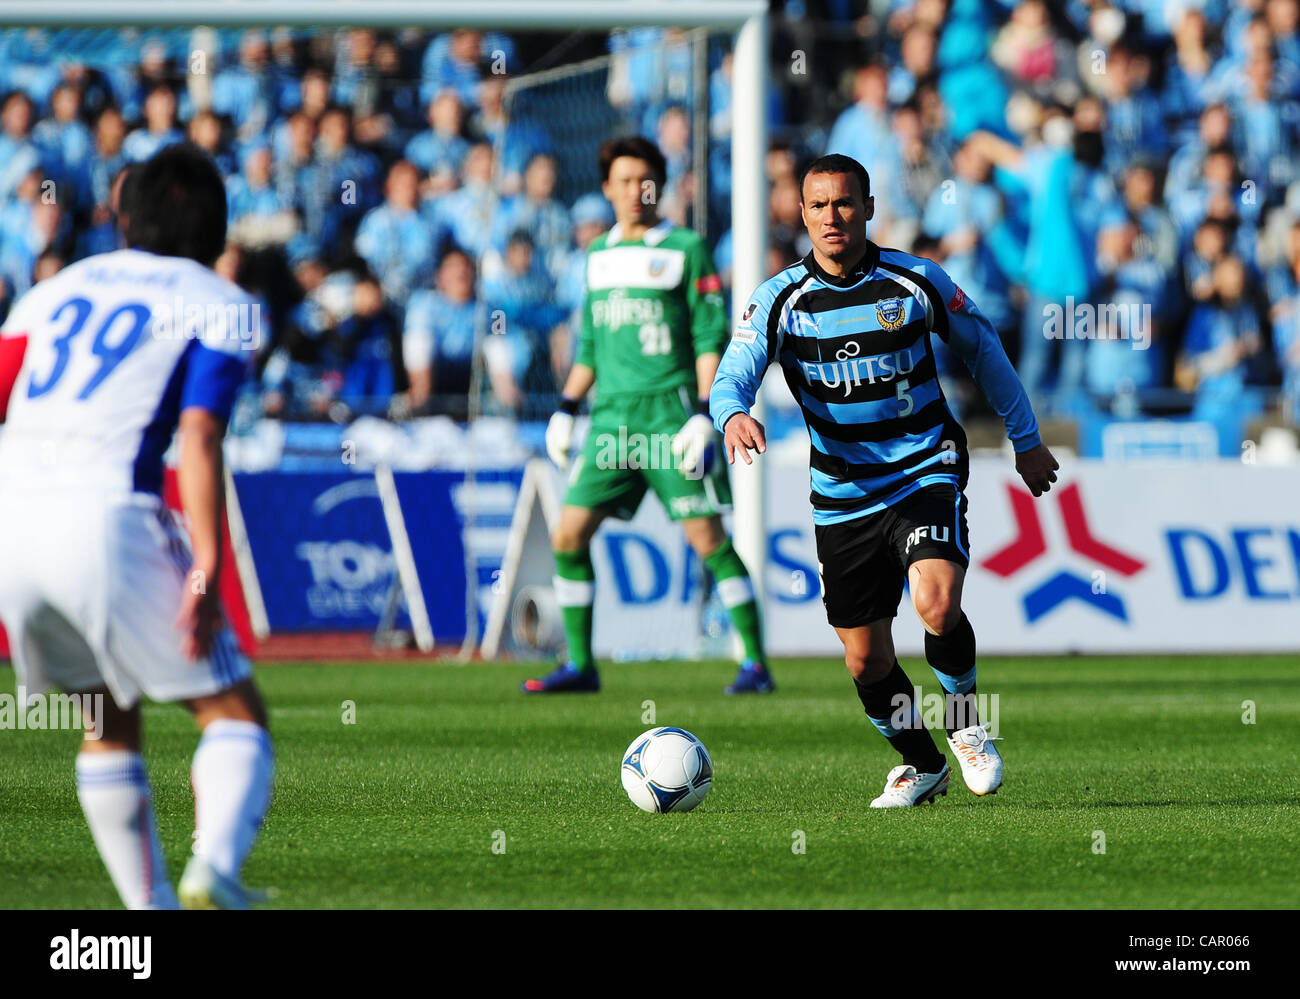 Kawasaki Frontale 1 F C Tokyo High Resolution Stock Photography and Images Alamy